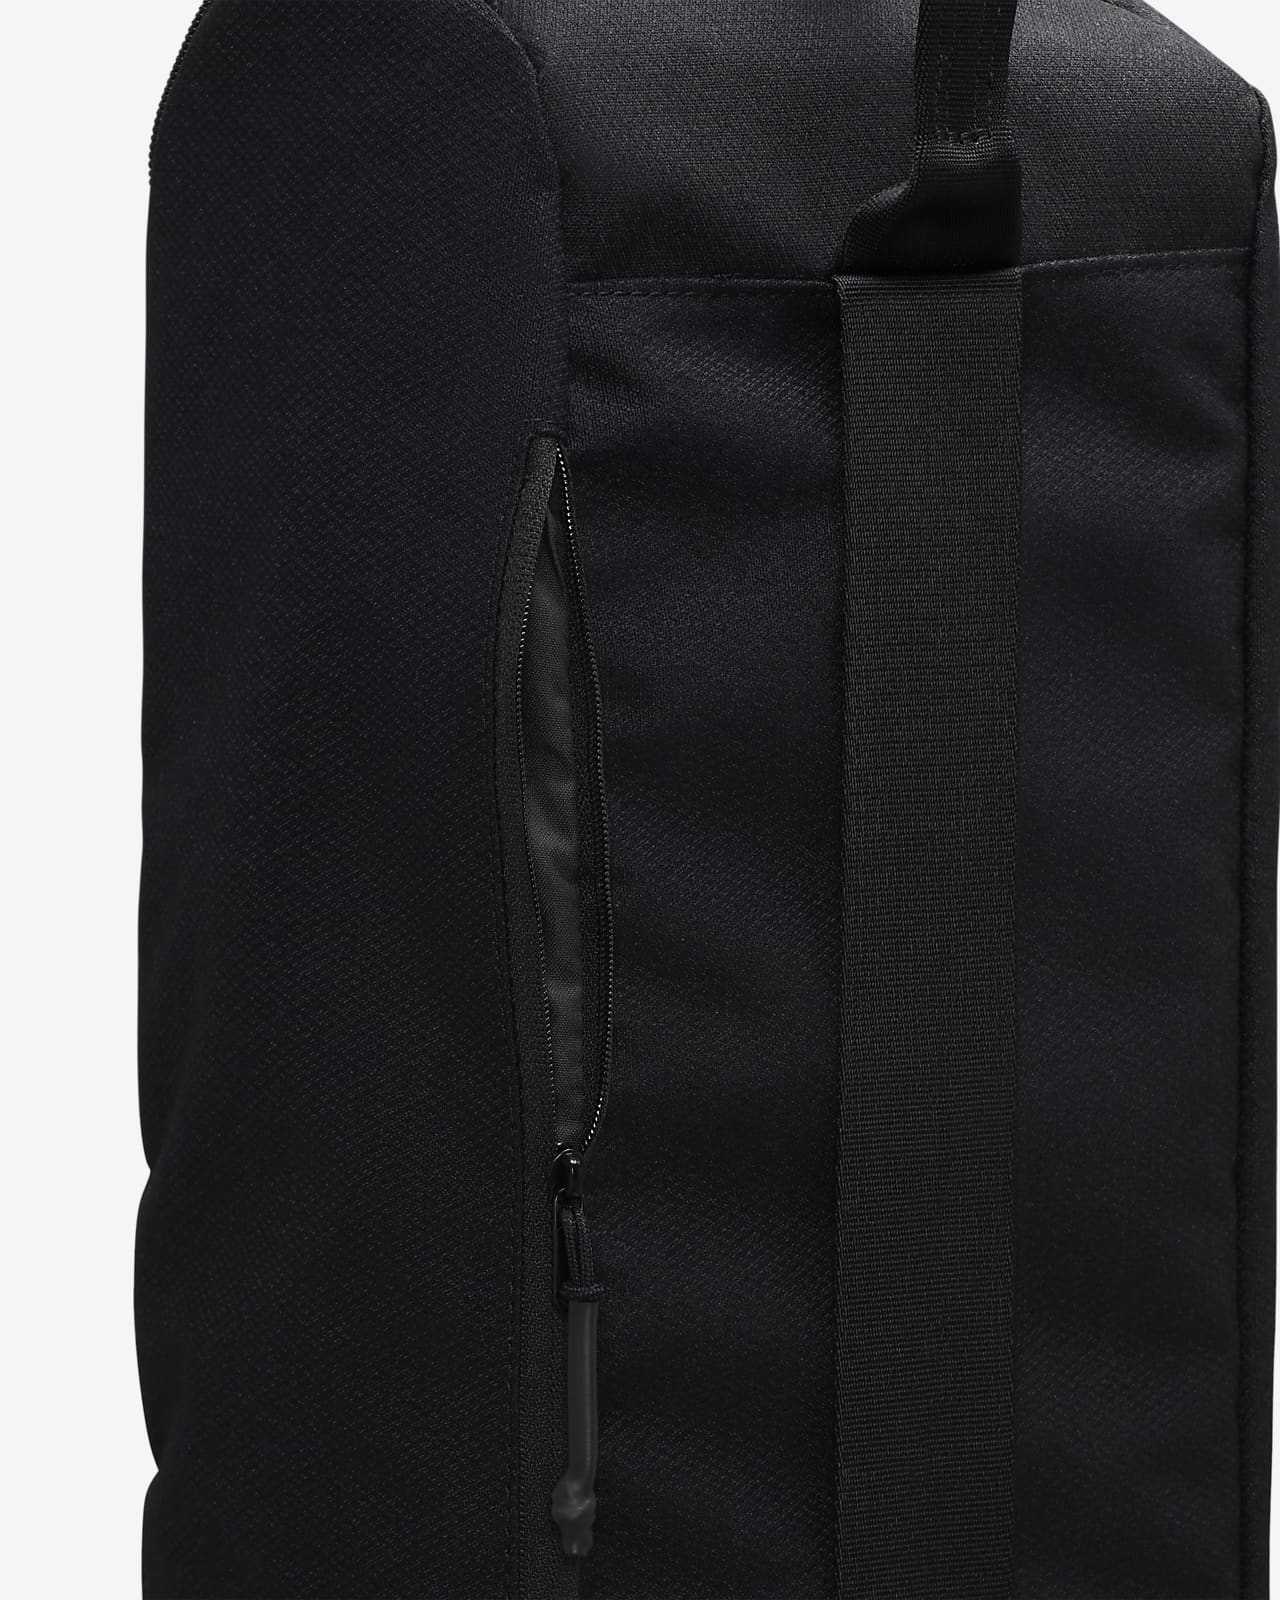 https://static.nike.com/a/images/t_PDP_1280_v1/f_auto,q_auto:eco/9cb81925-c6bc-4d2e-916d-ba6a464d841d/yoga-mat-bag-21l-KfBFDB.png